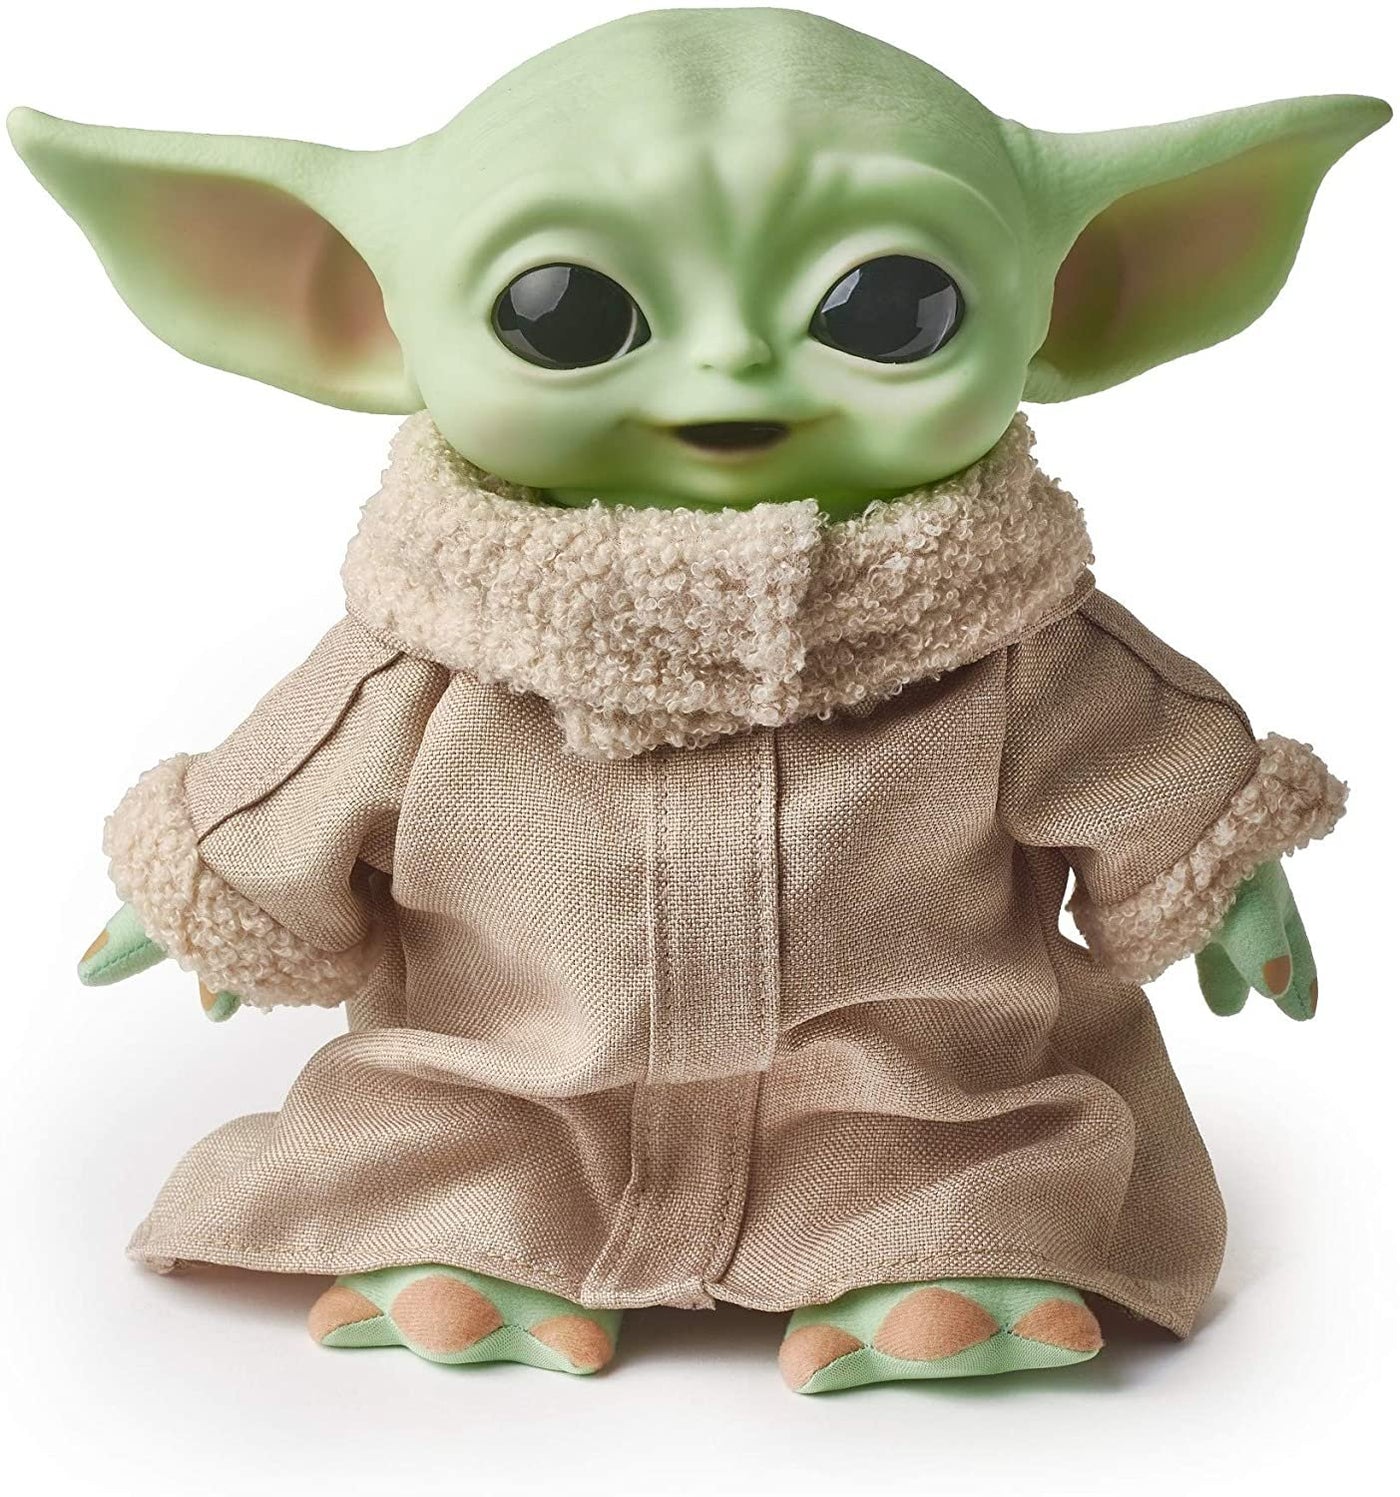 Star Wars™: The Child Plush Toy with Carrying Satchel